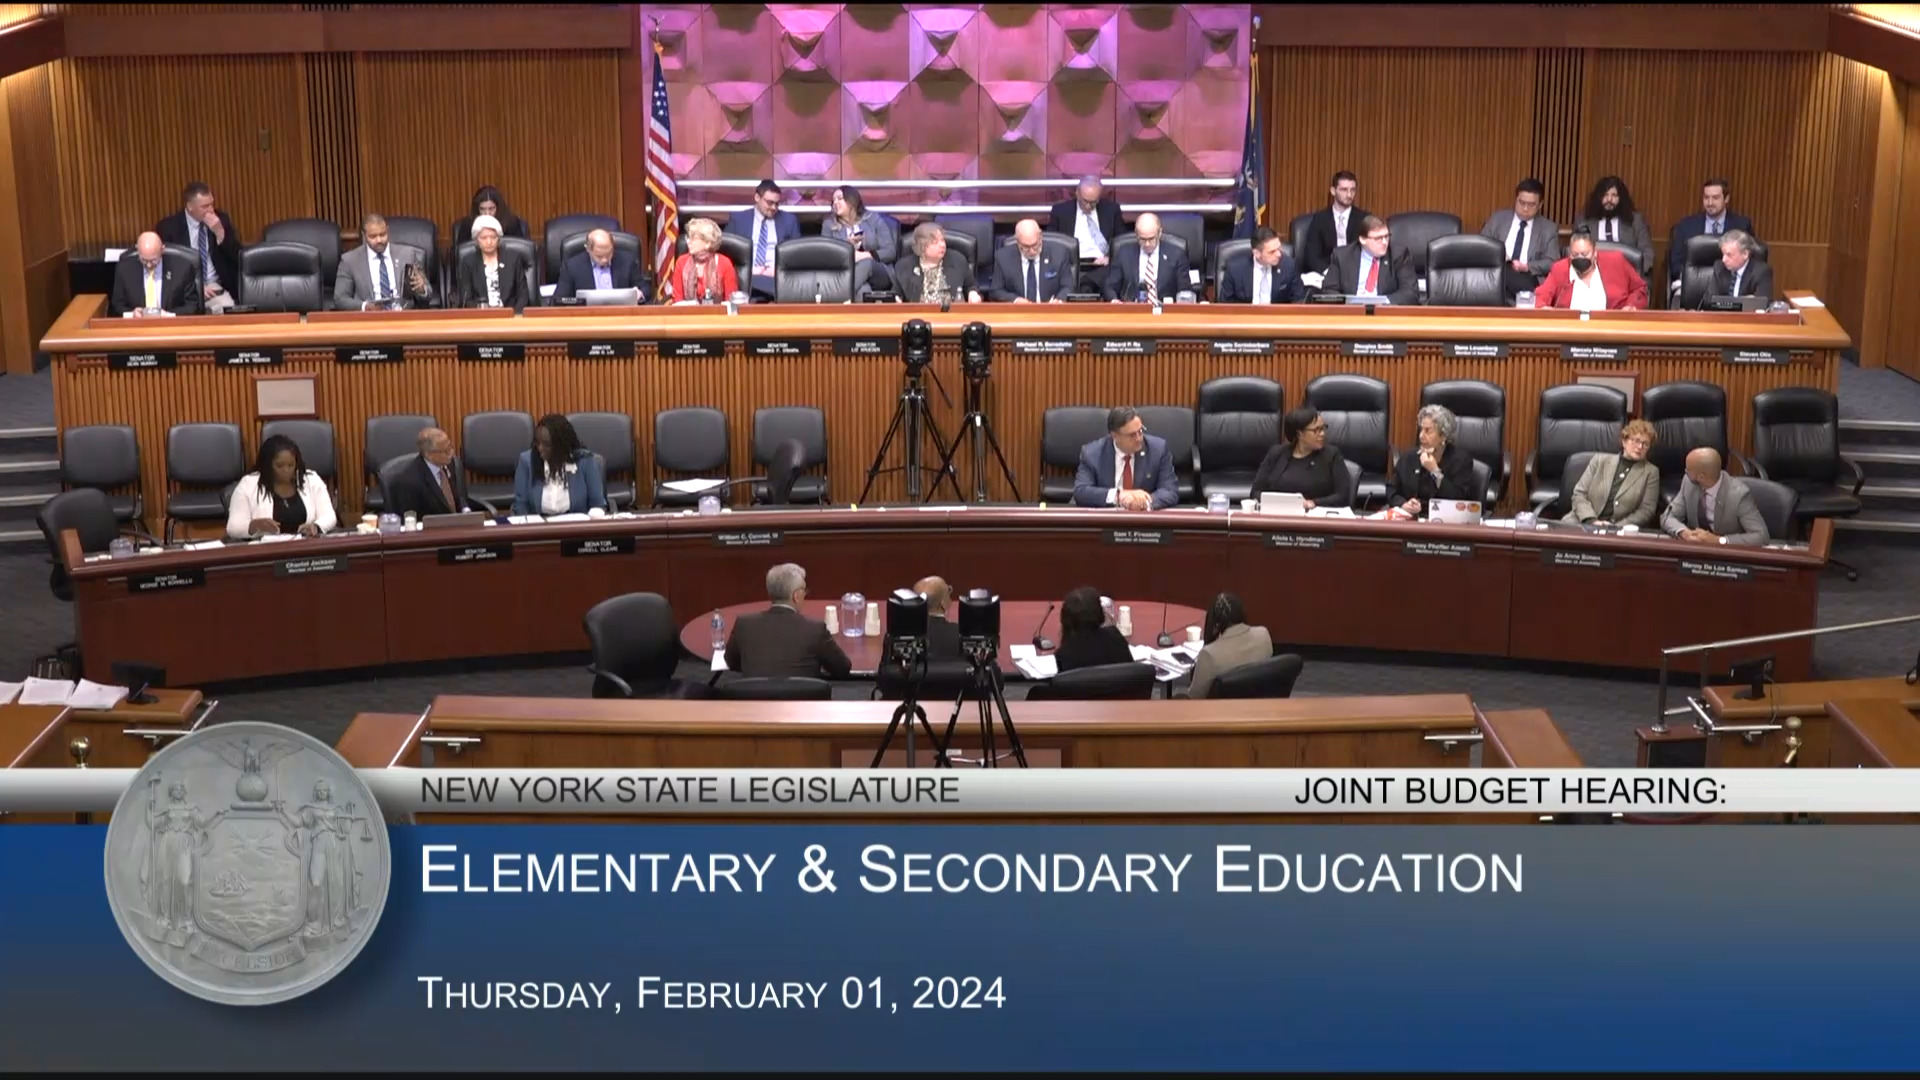 NYC Dept. Of Education Chancellor Testifies During Budget Hearing on Elementary and Secondary Education